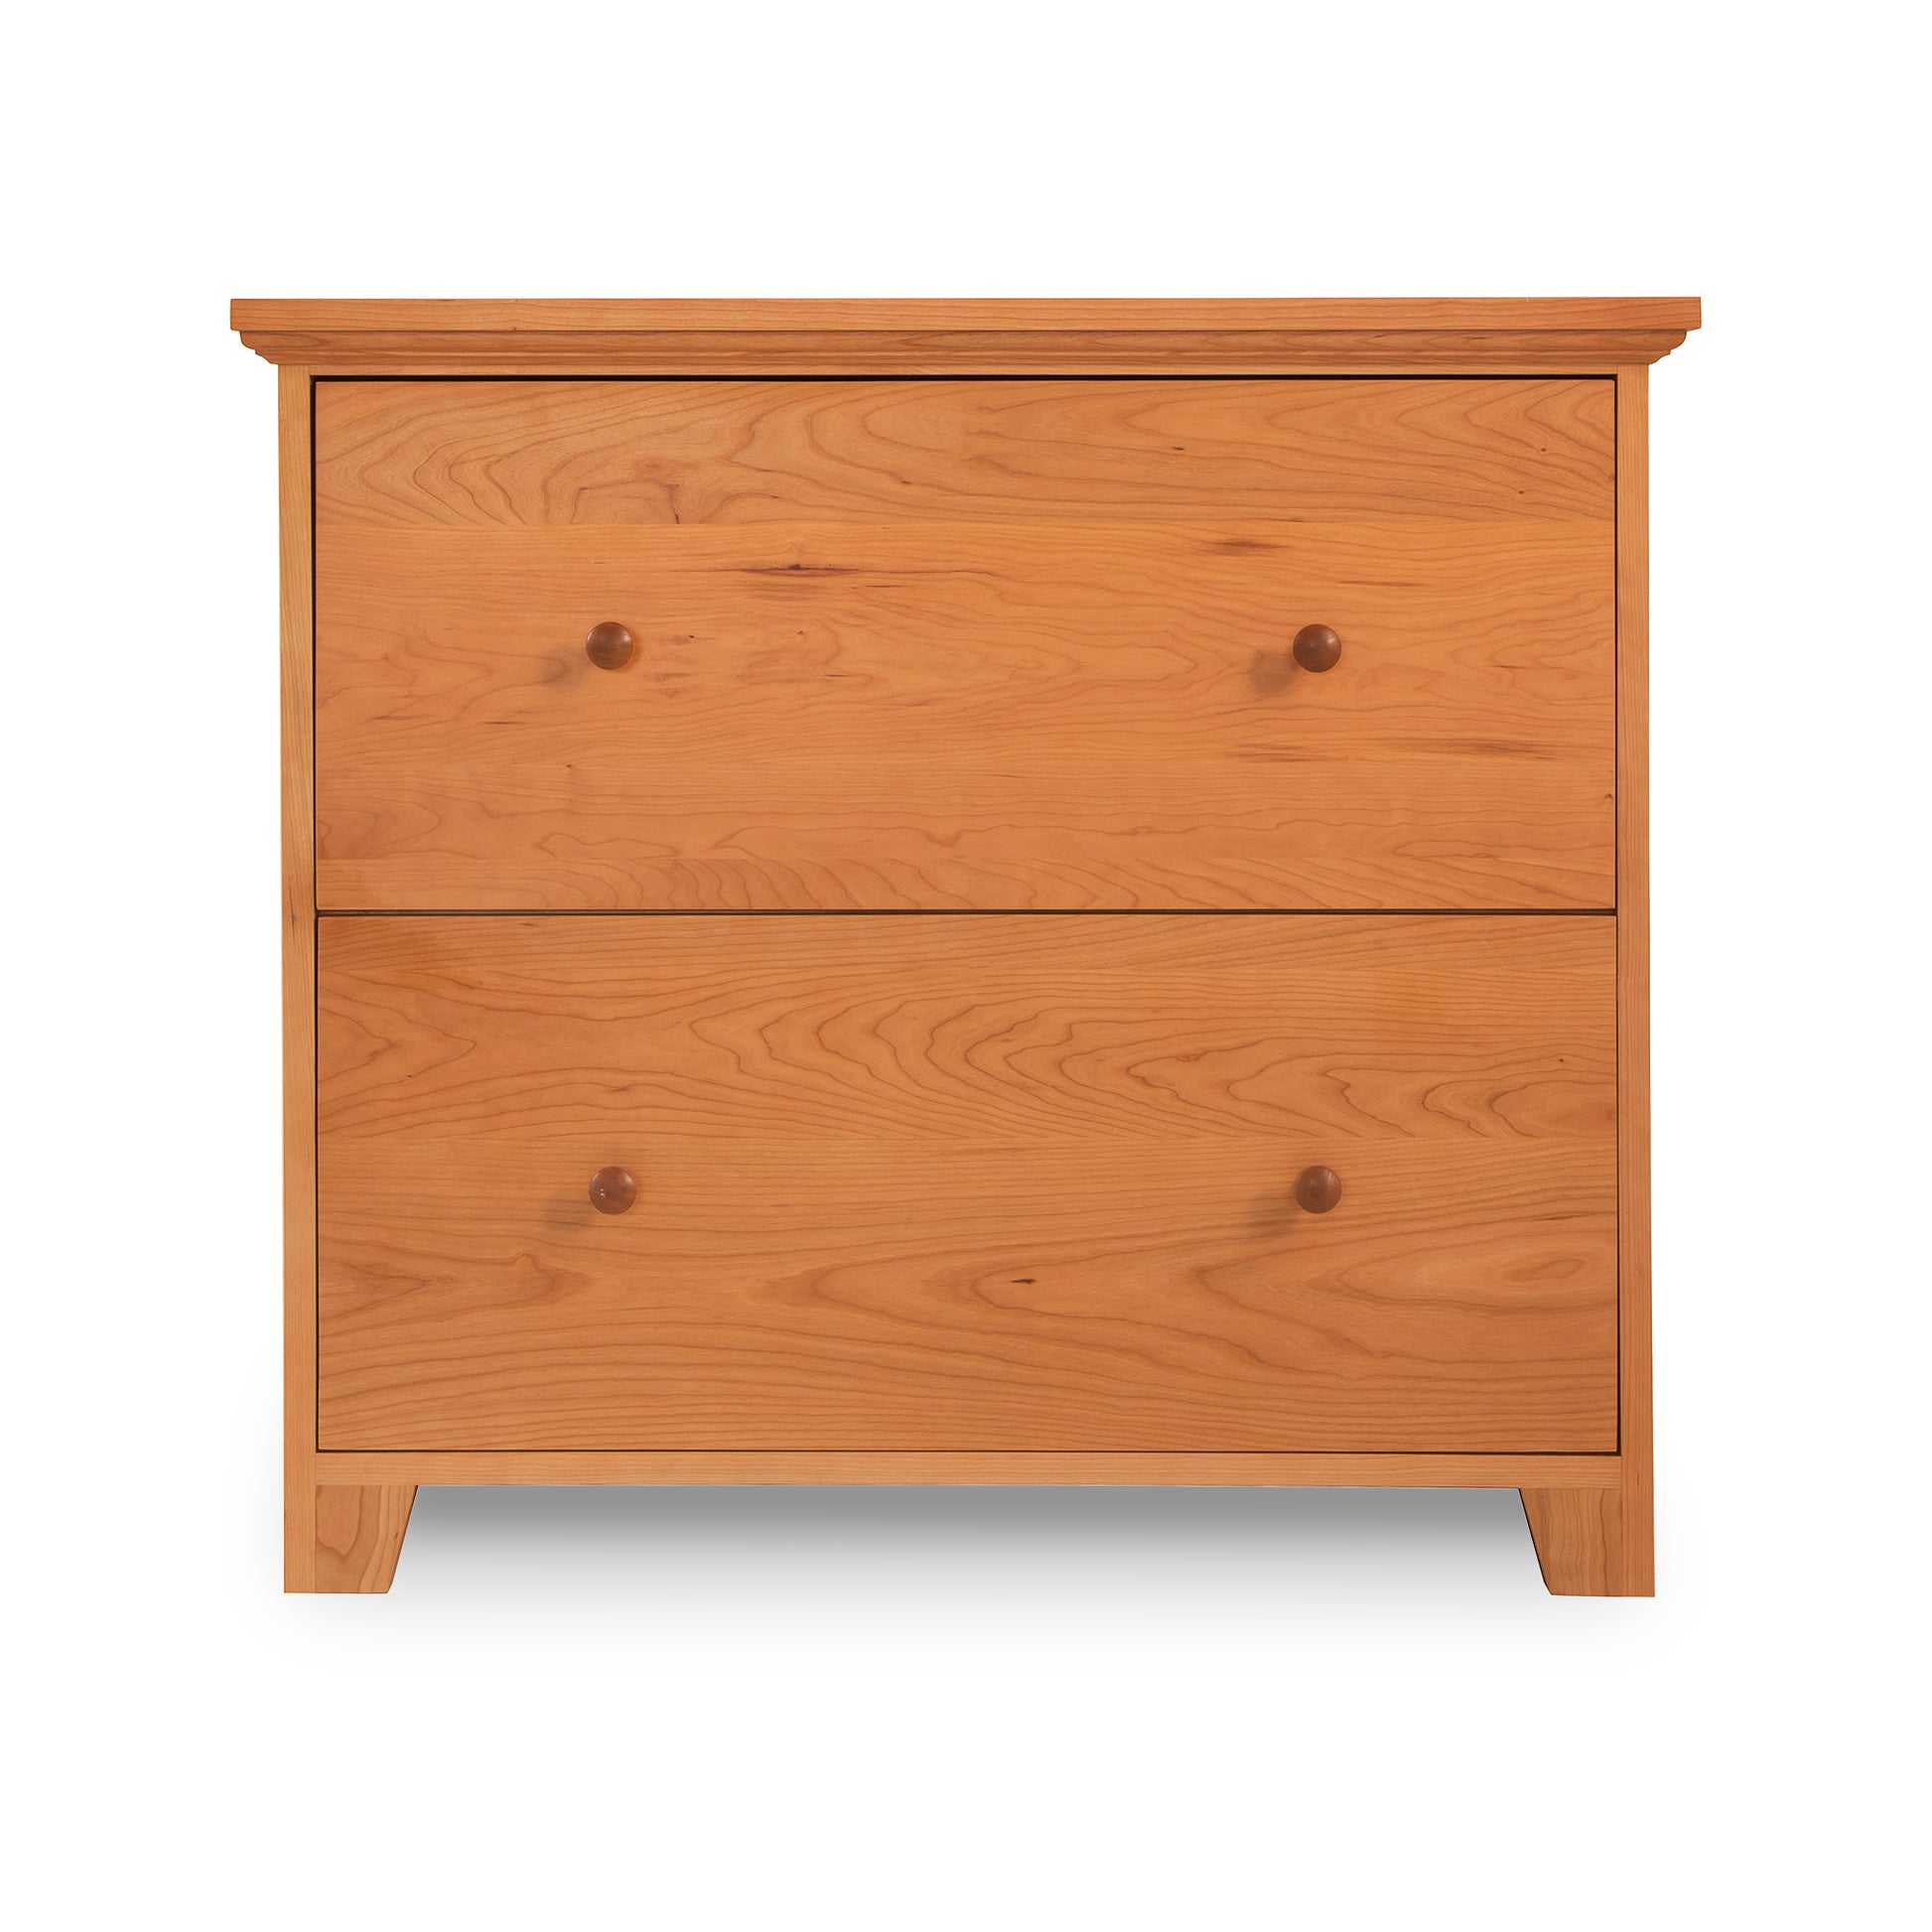 A Lyndon Furniture Shaker 2-Drawer Lateral File Cabinet on a white background.